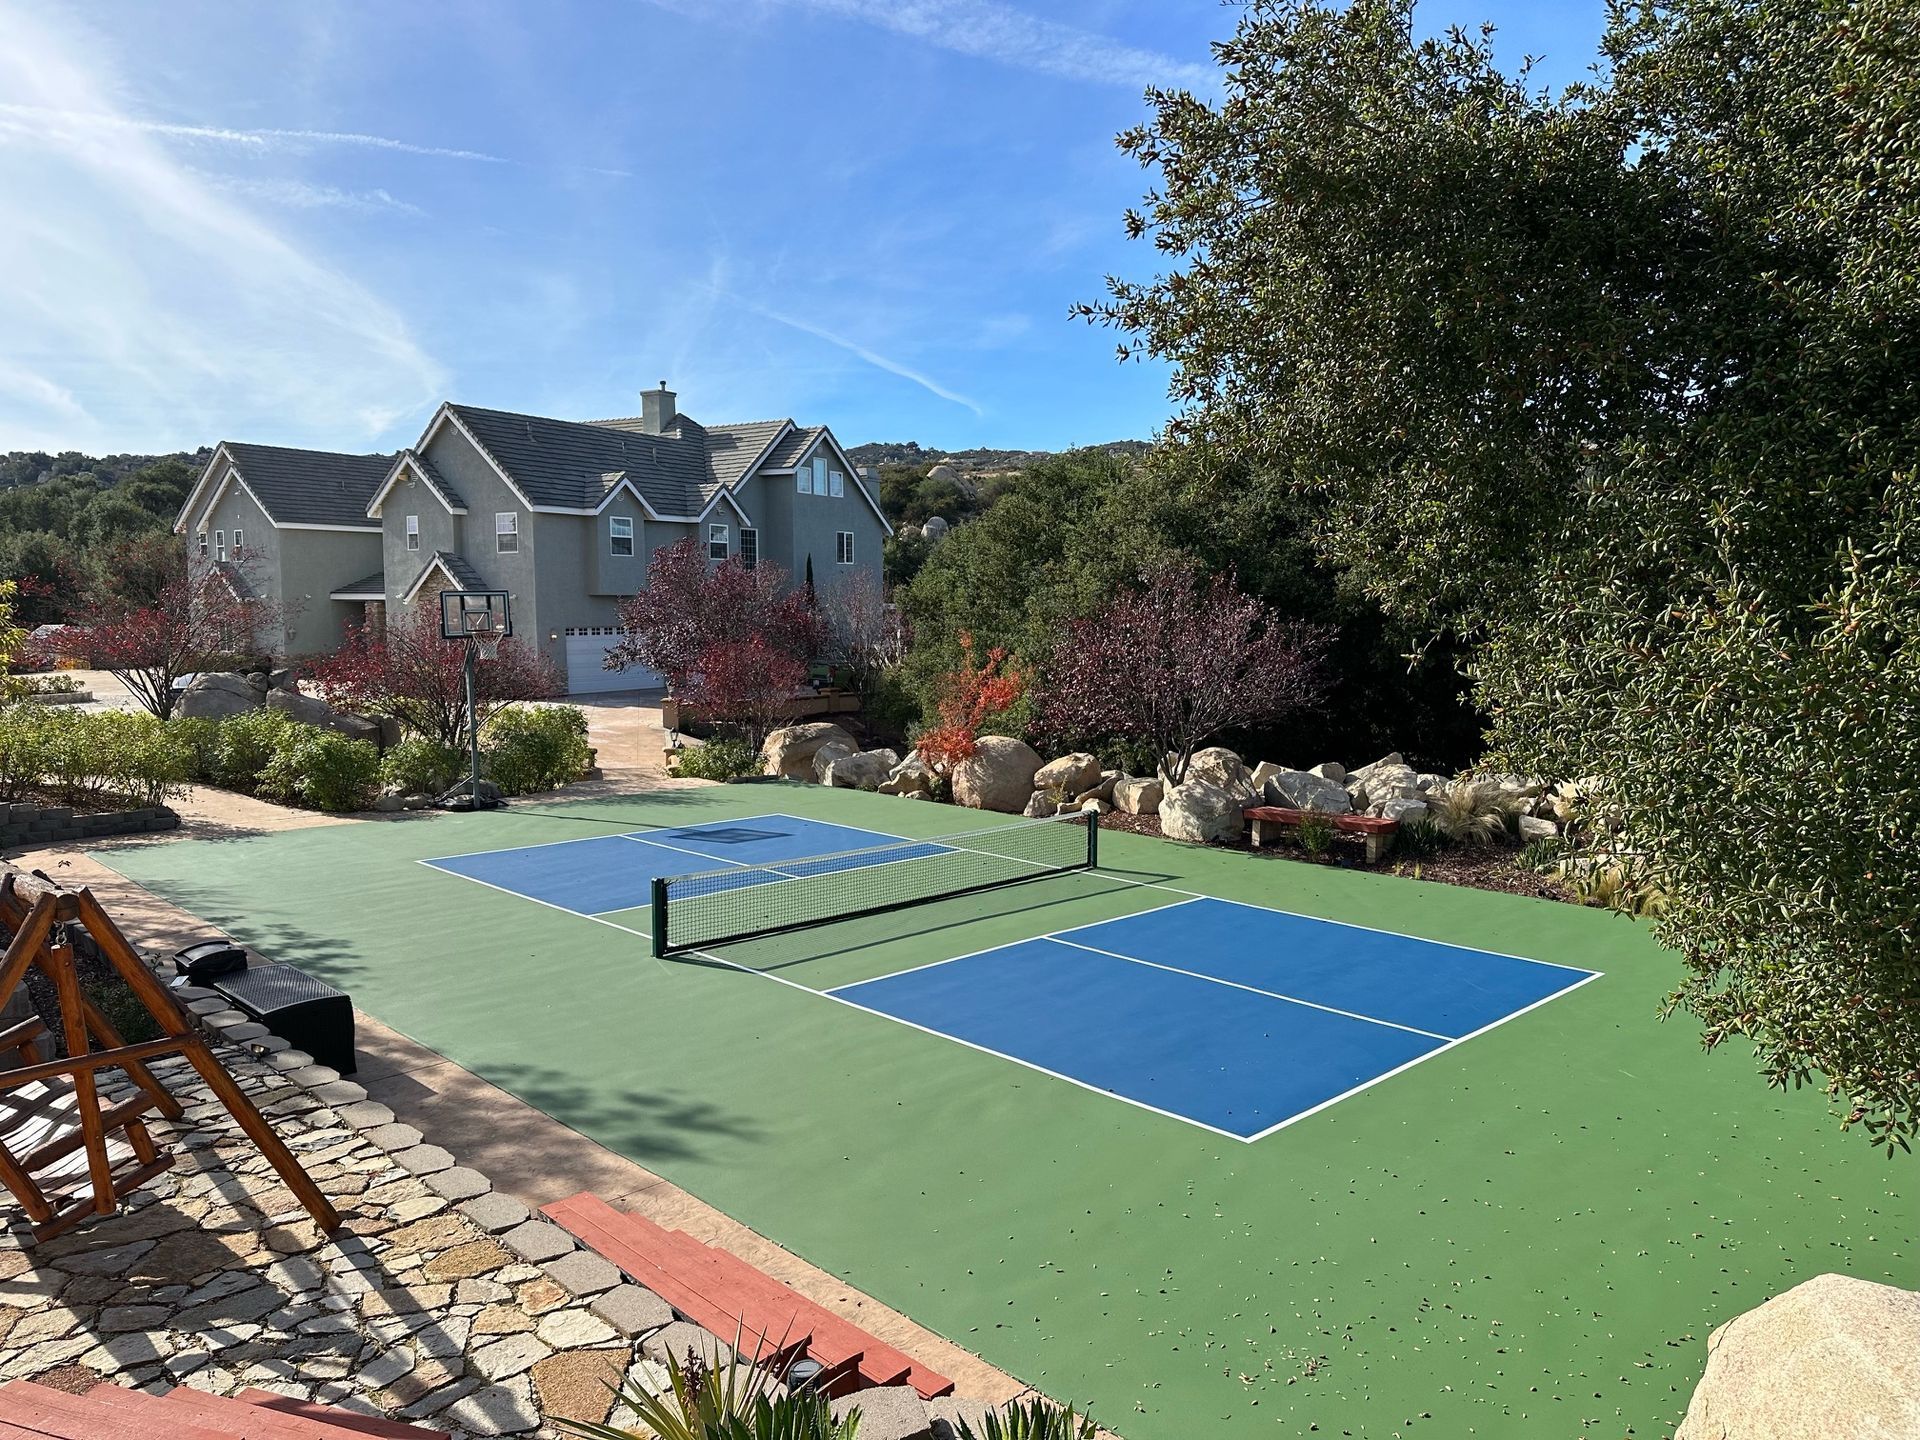 a pickleball court with a large house in the background